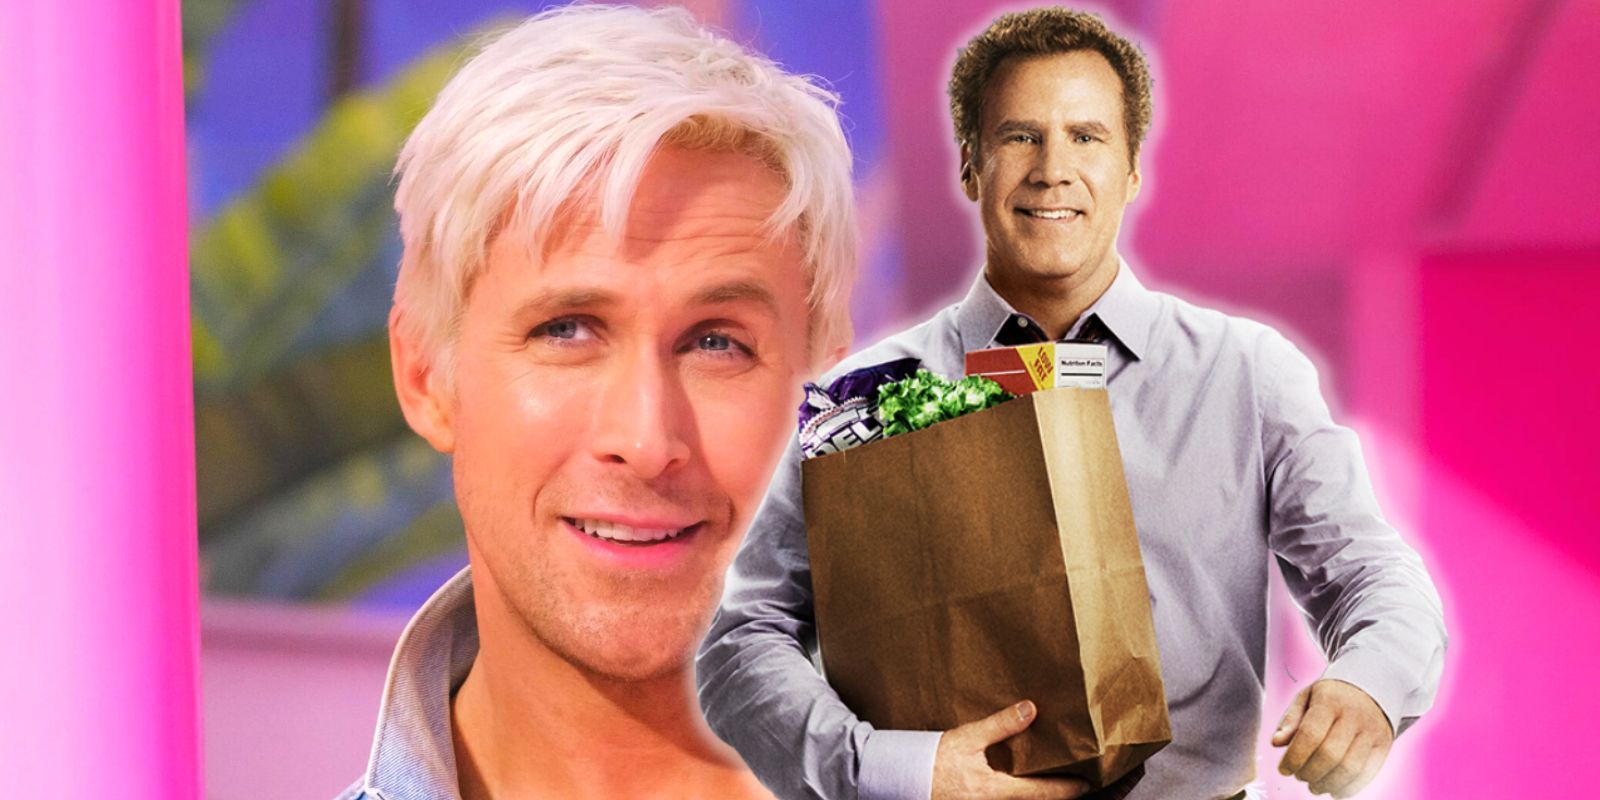 A bleach-blond Ryan Gosling smiling alongside Will Ferrell, holding a paper bag filled with groceries